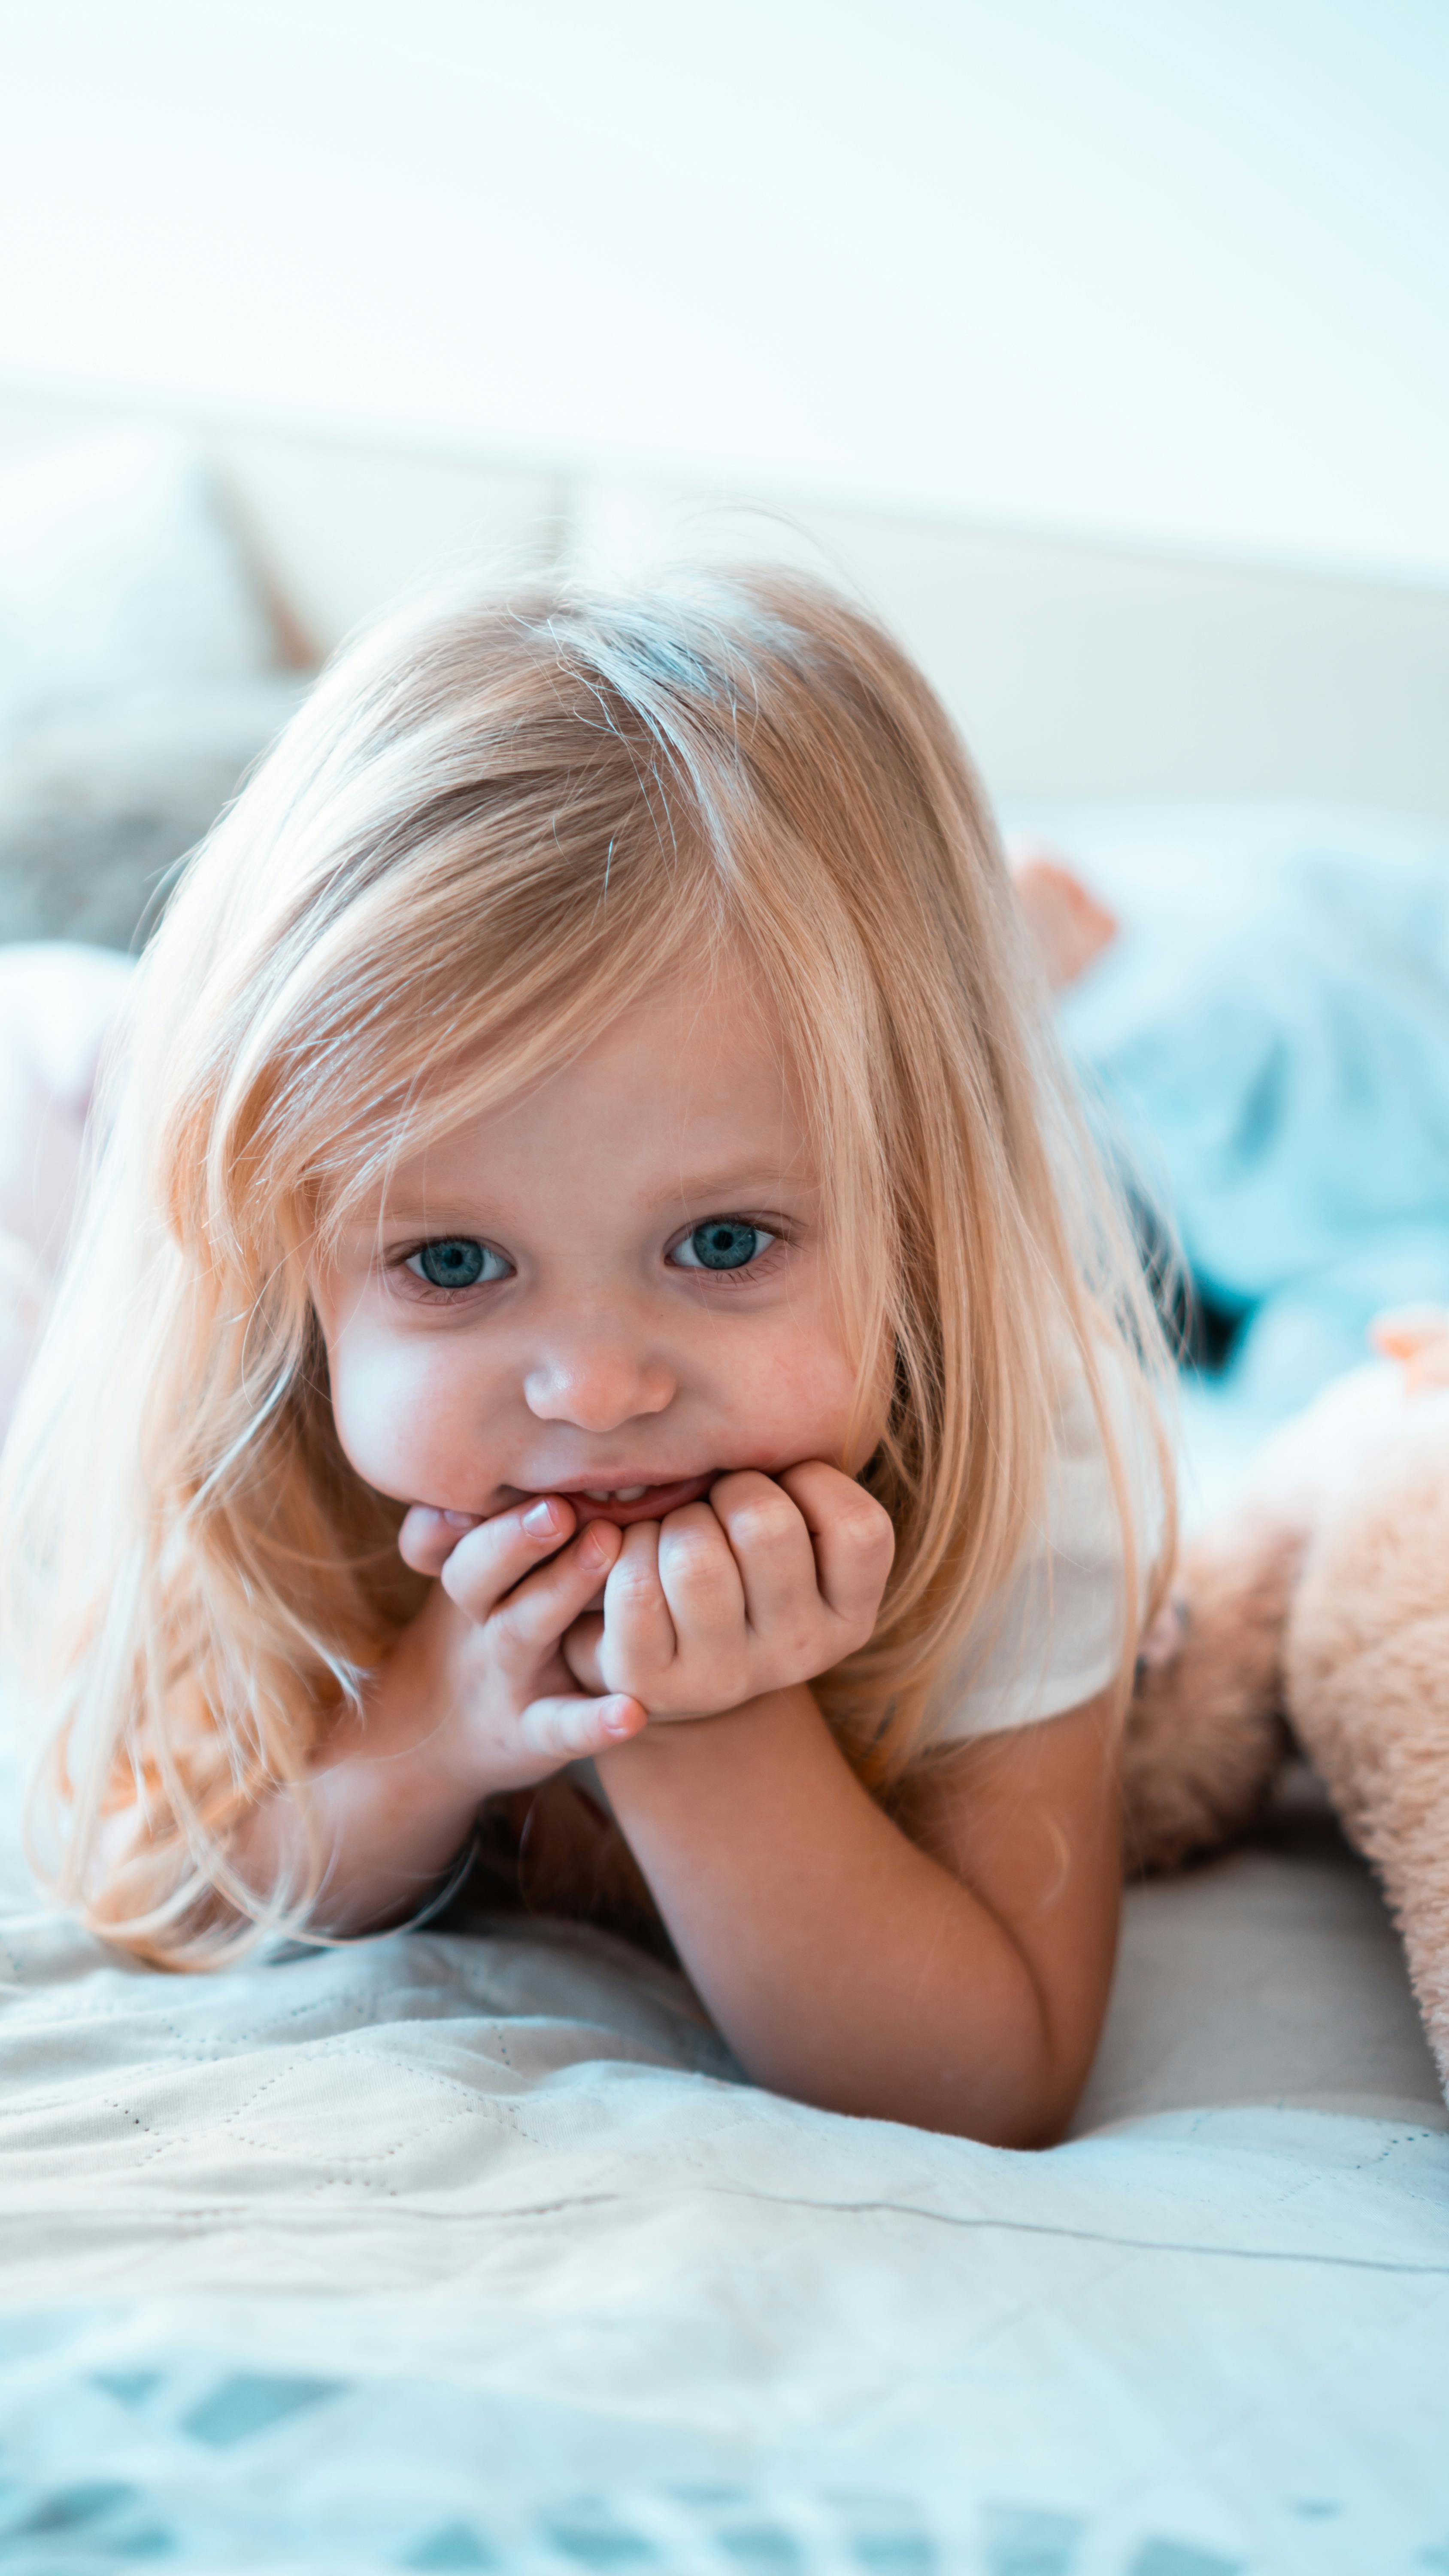 A Young Girl with Blonde Hair and Blue Eyes · Free Stock Photo